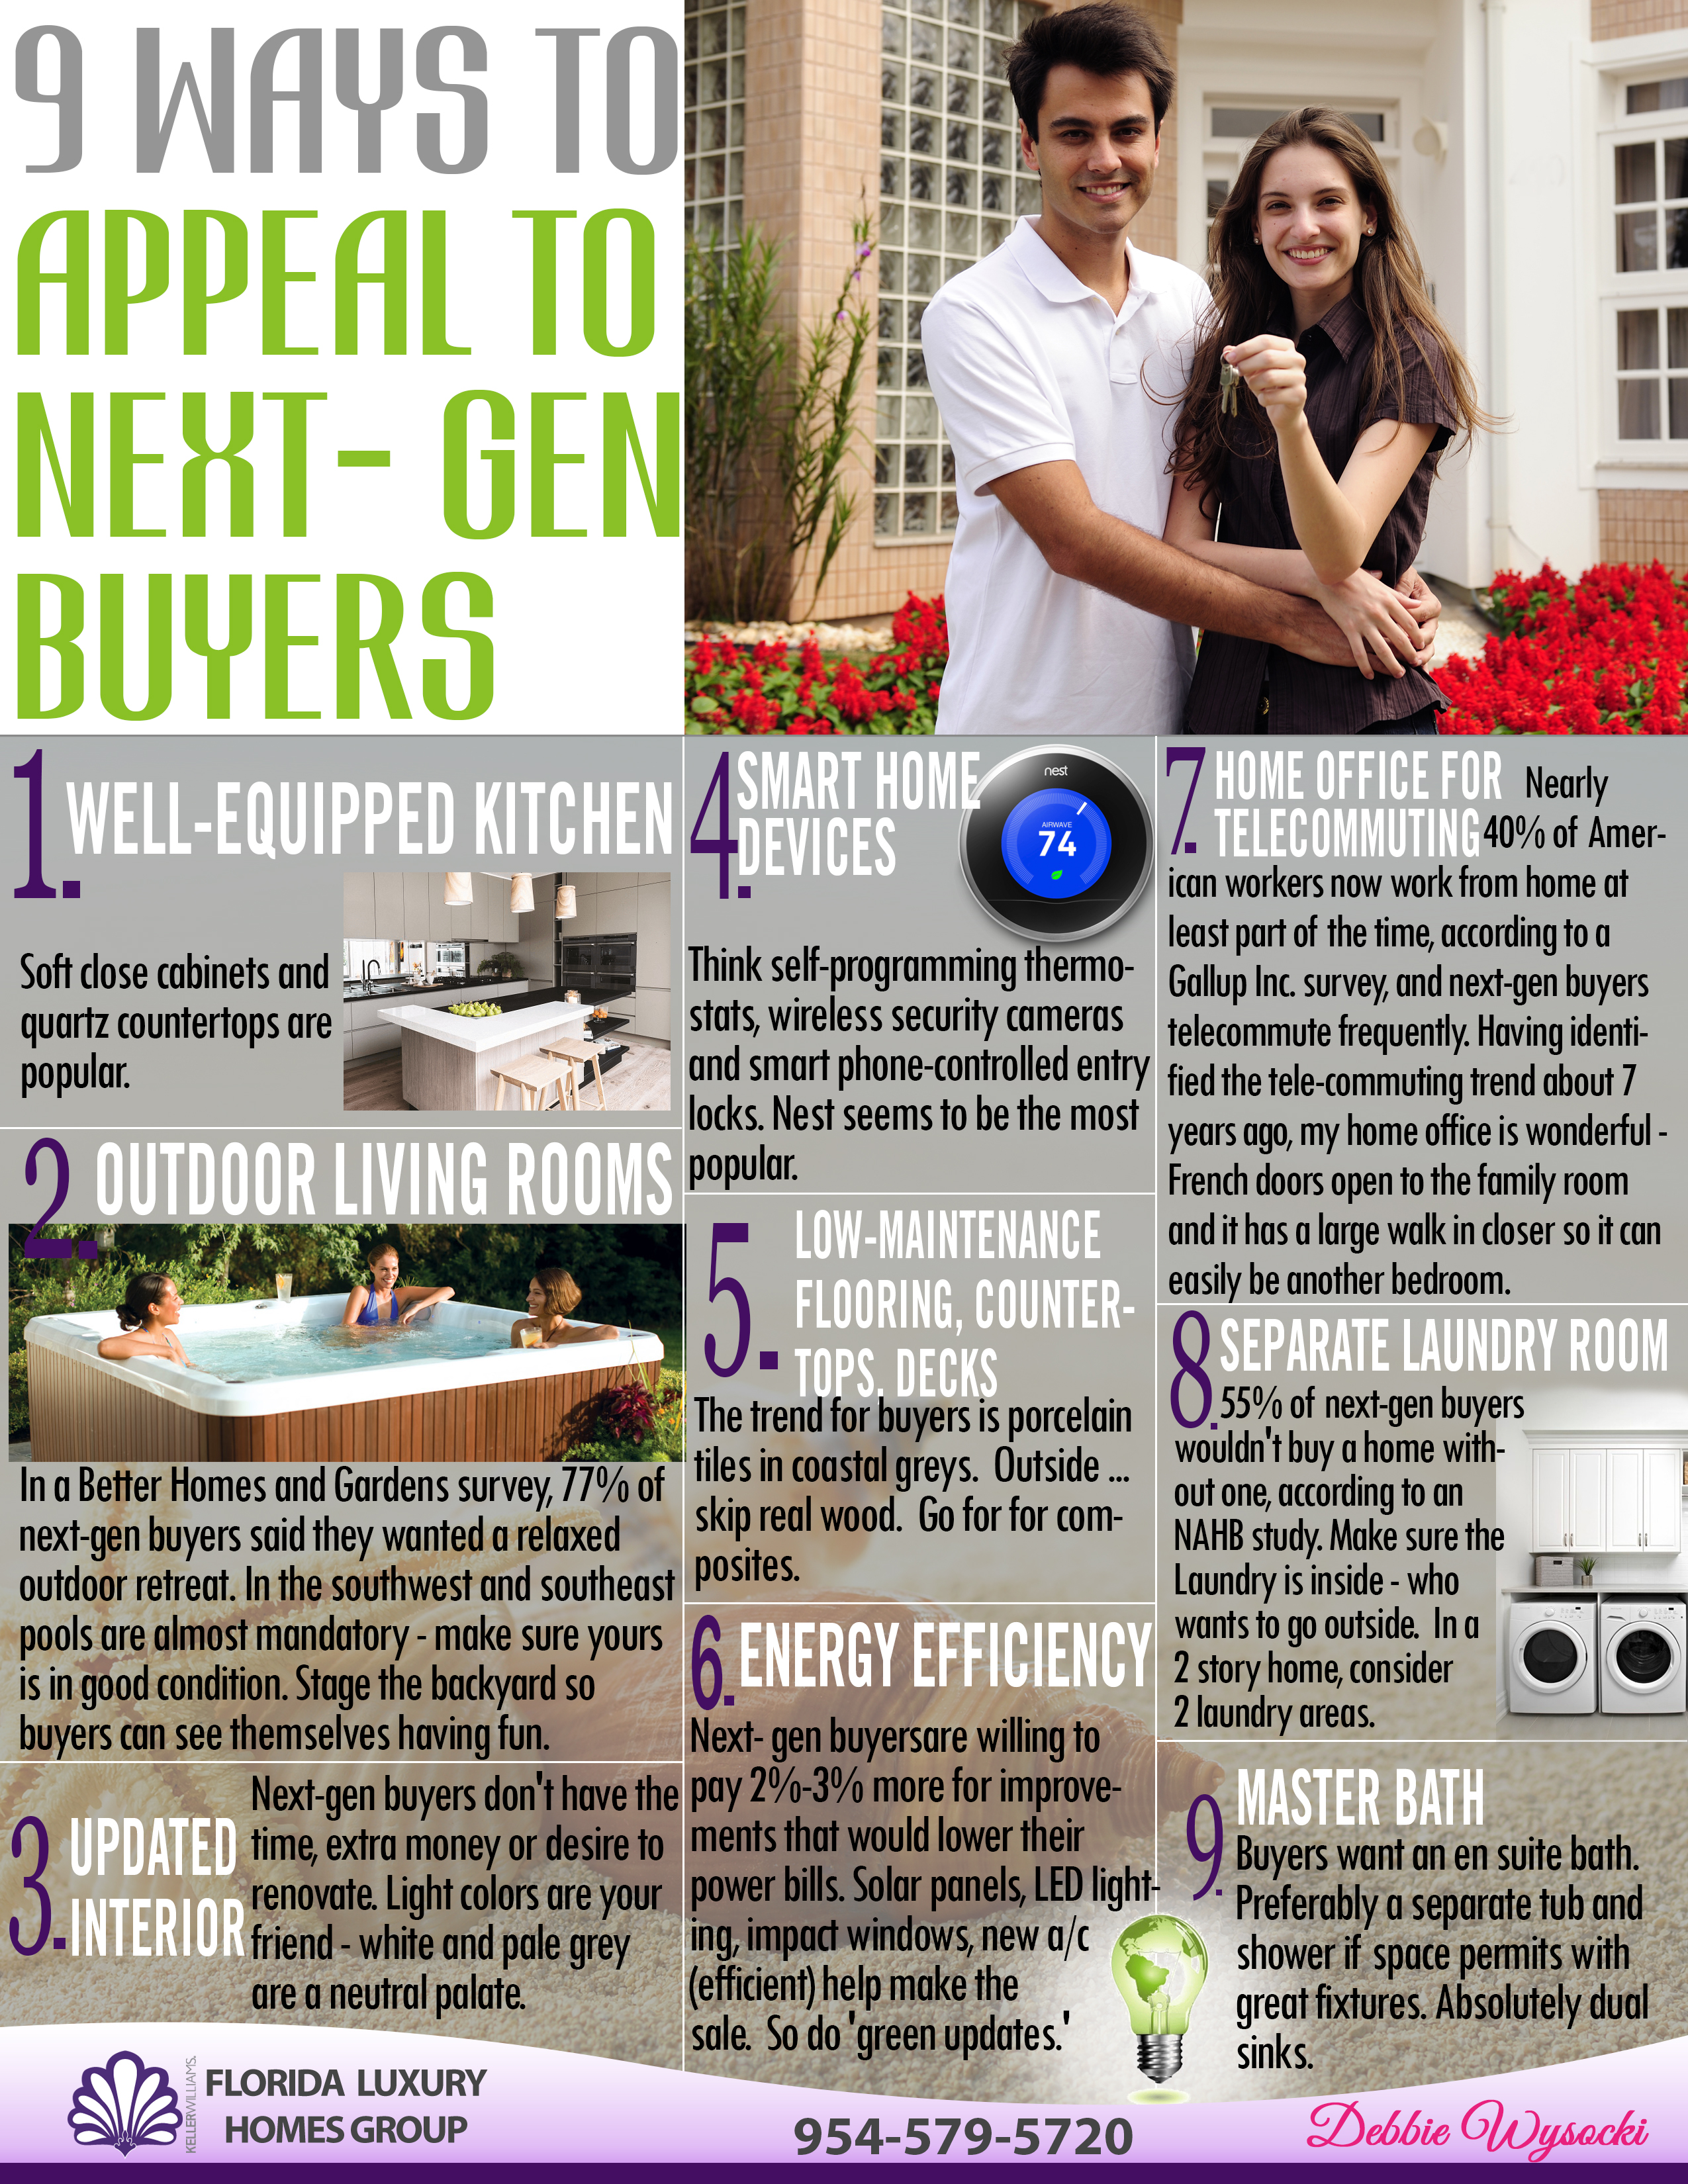 8 Ways to Appeal to New-Gen Buyers [Infographic]